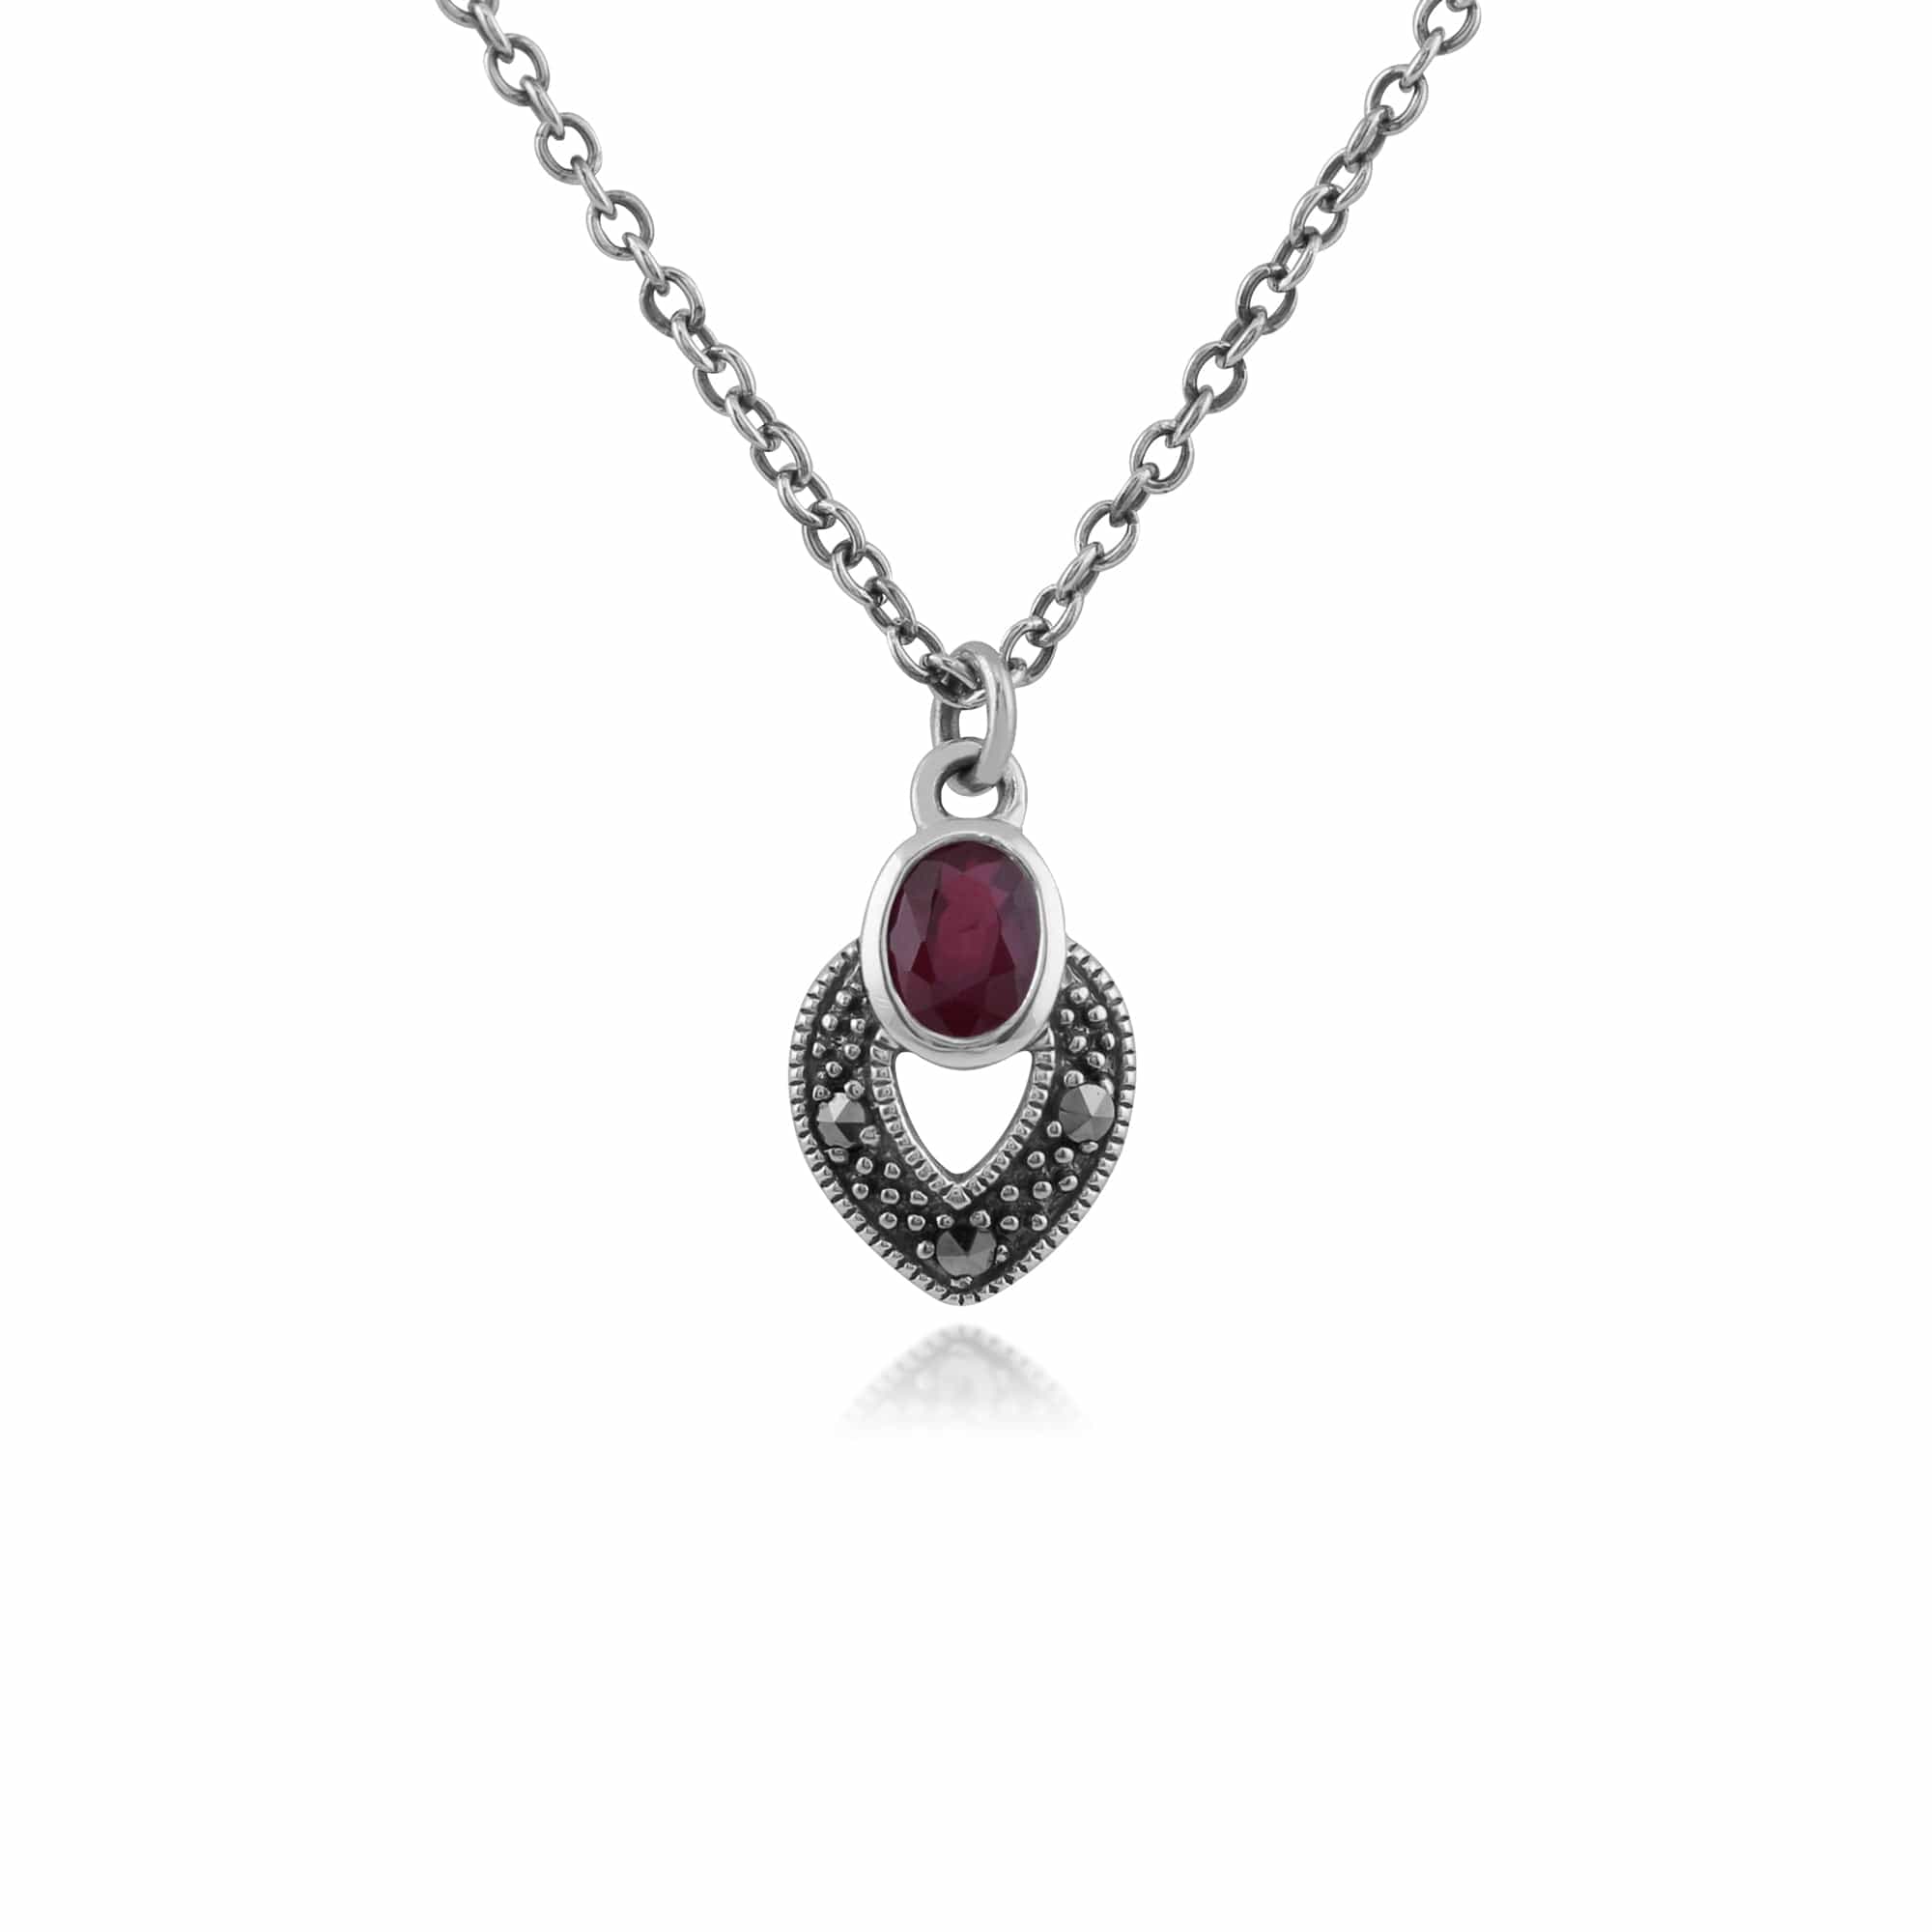 Art Deco Style Oval Ruby & Marcasite Necklace in 925 Sterling Silver - Gemondo